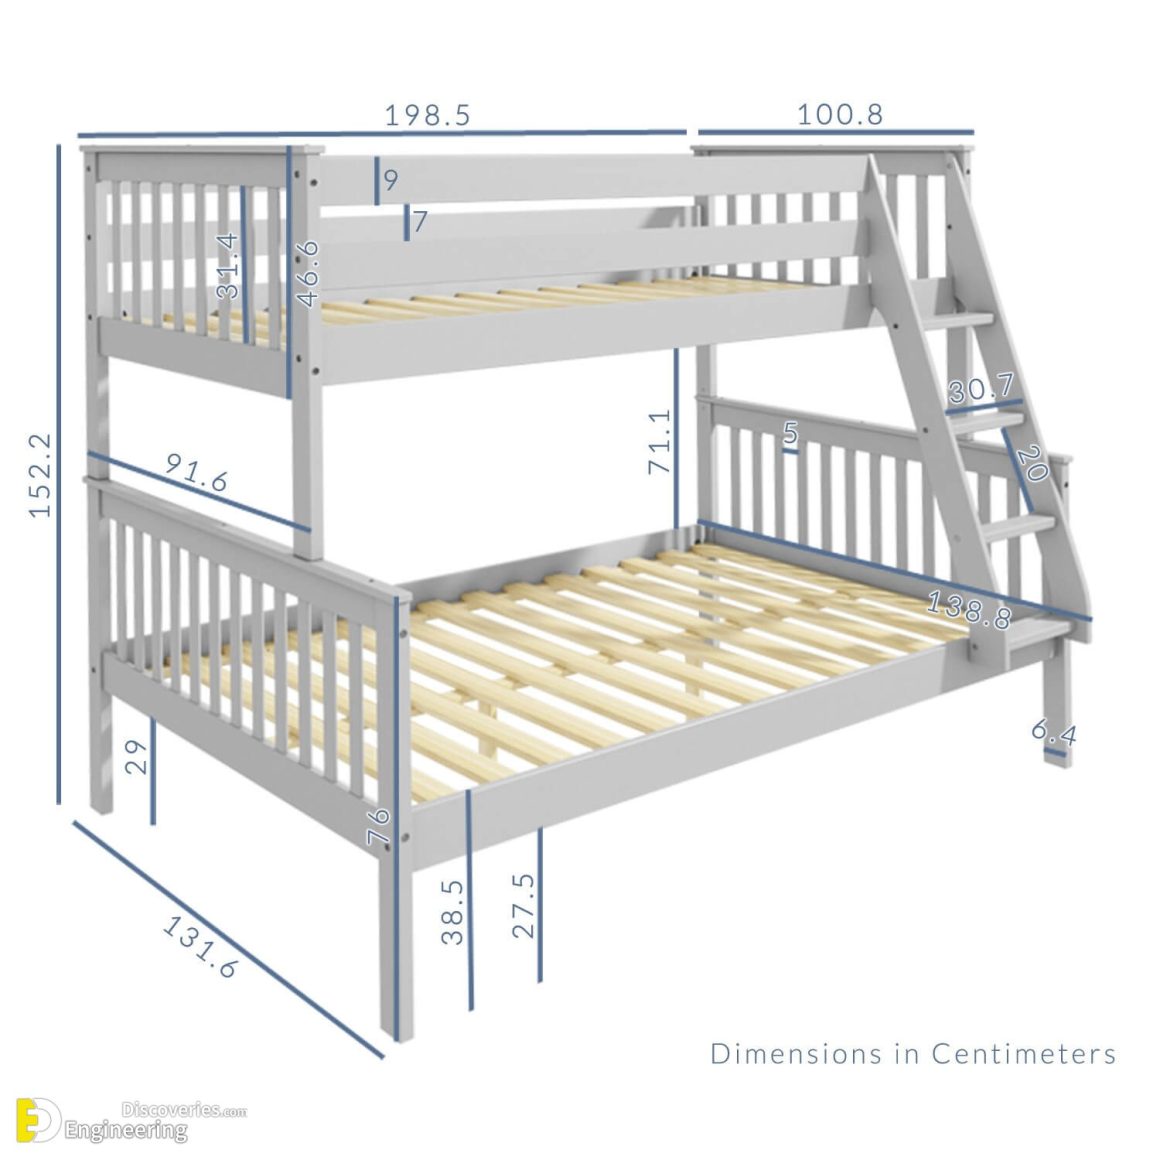 Amazing Bunk Bed Designs With Dimension - Engineering Discoveries